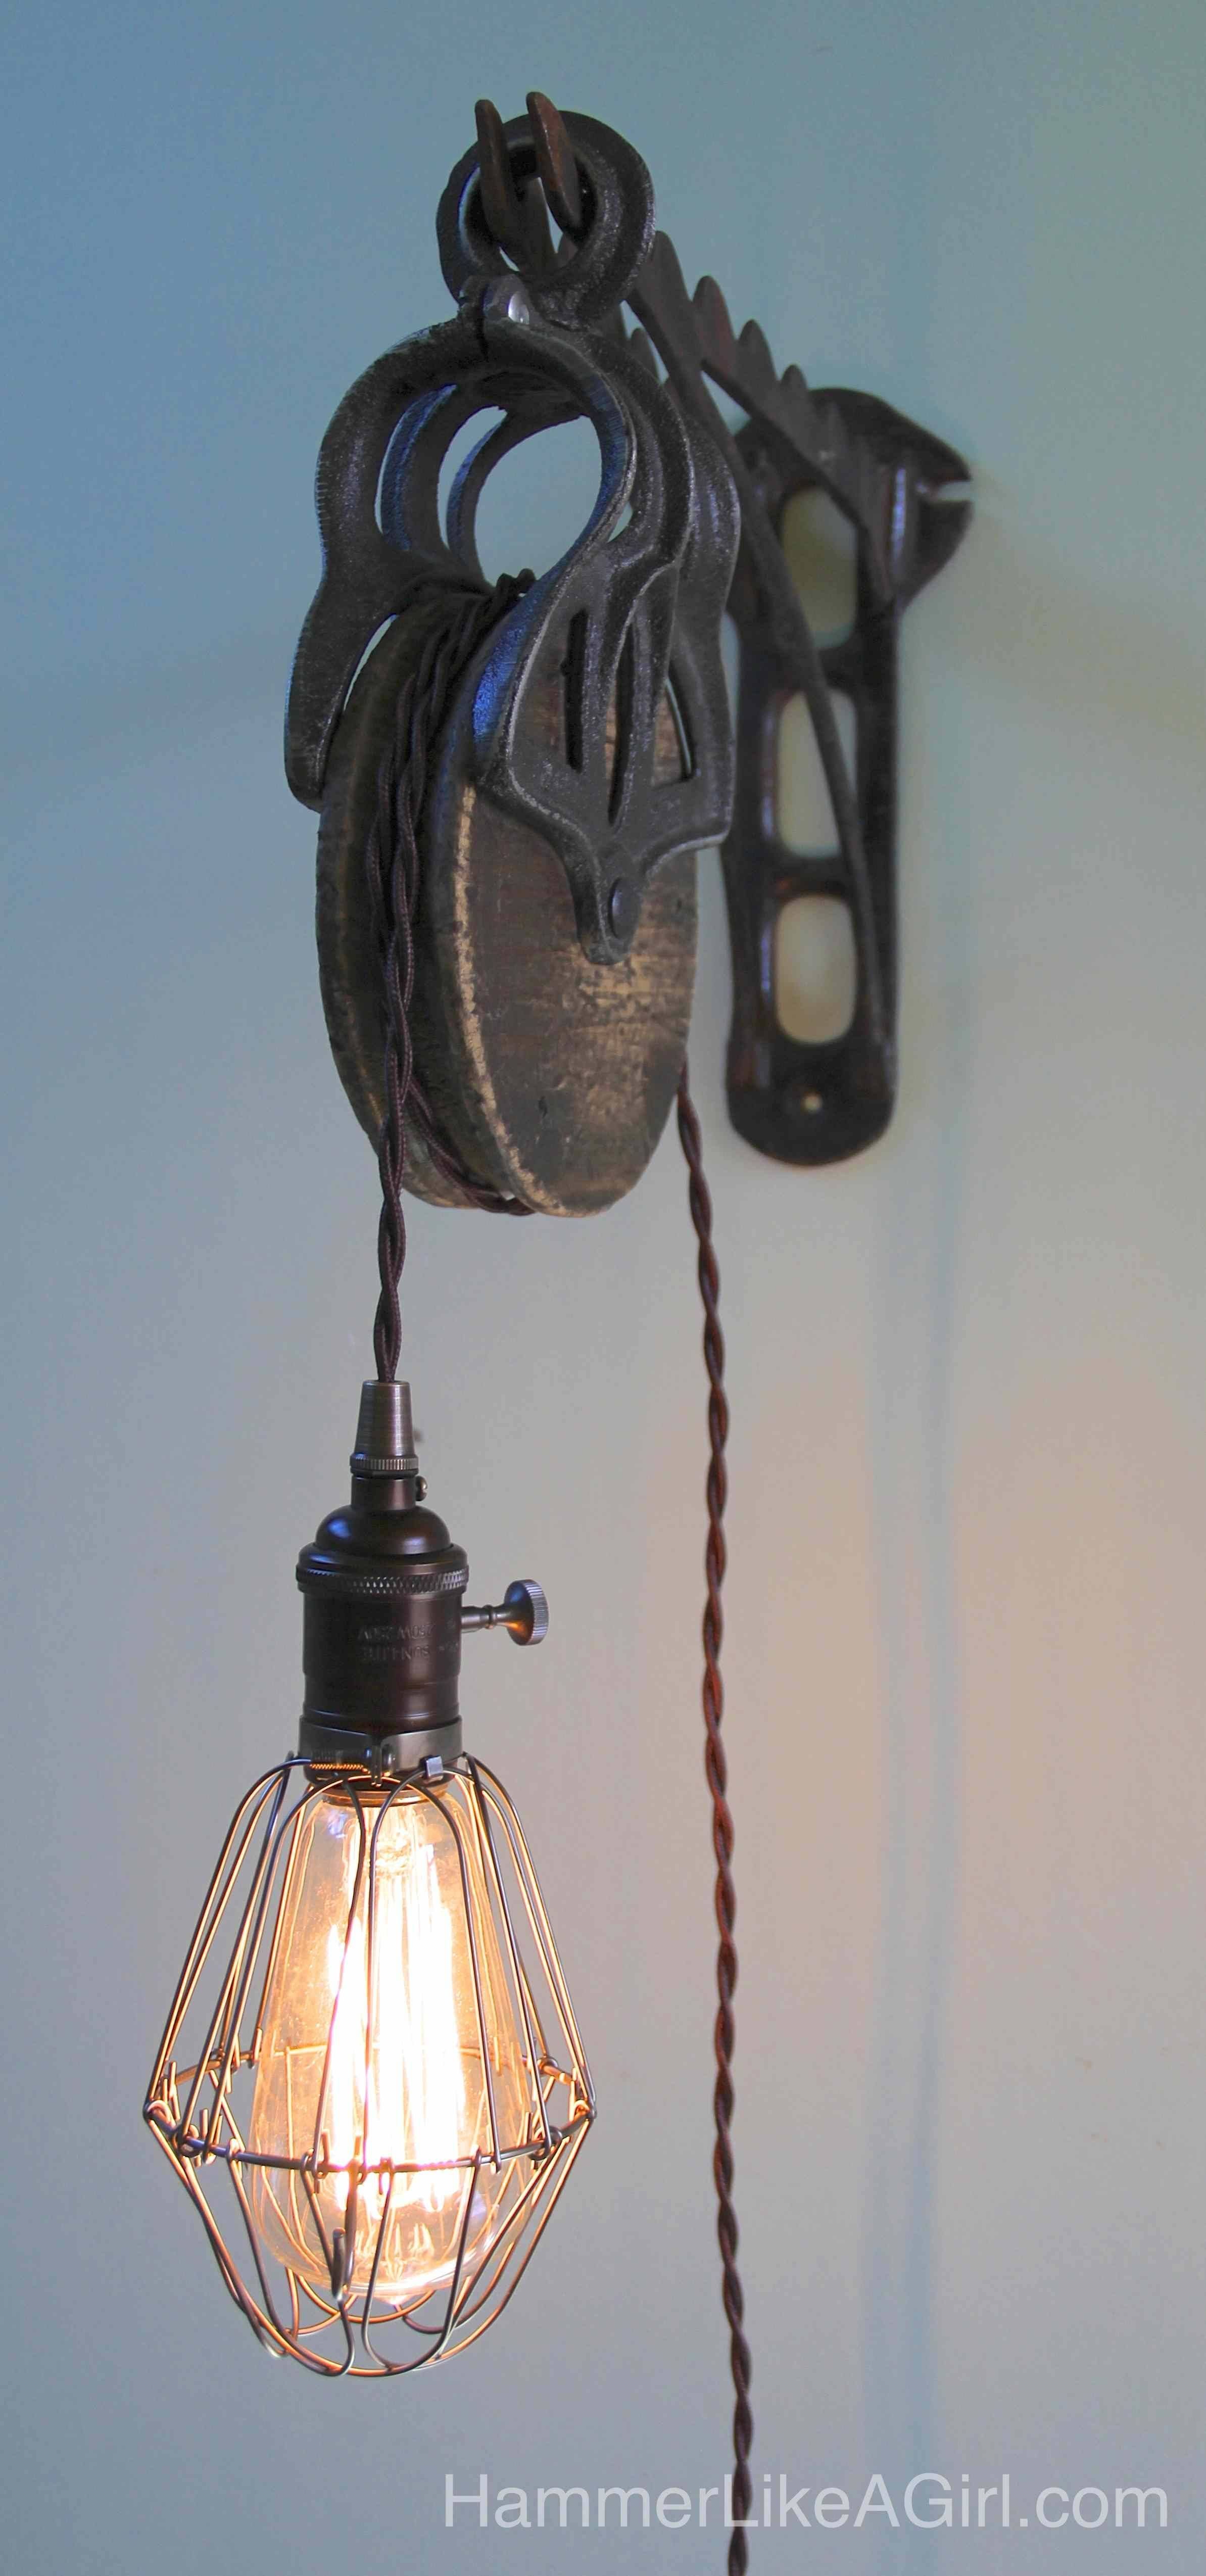 Pulley Pendant Light Fixtures – Baby Exit For Pulley Pendant Light Fixtures (View 2 of 15)